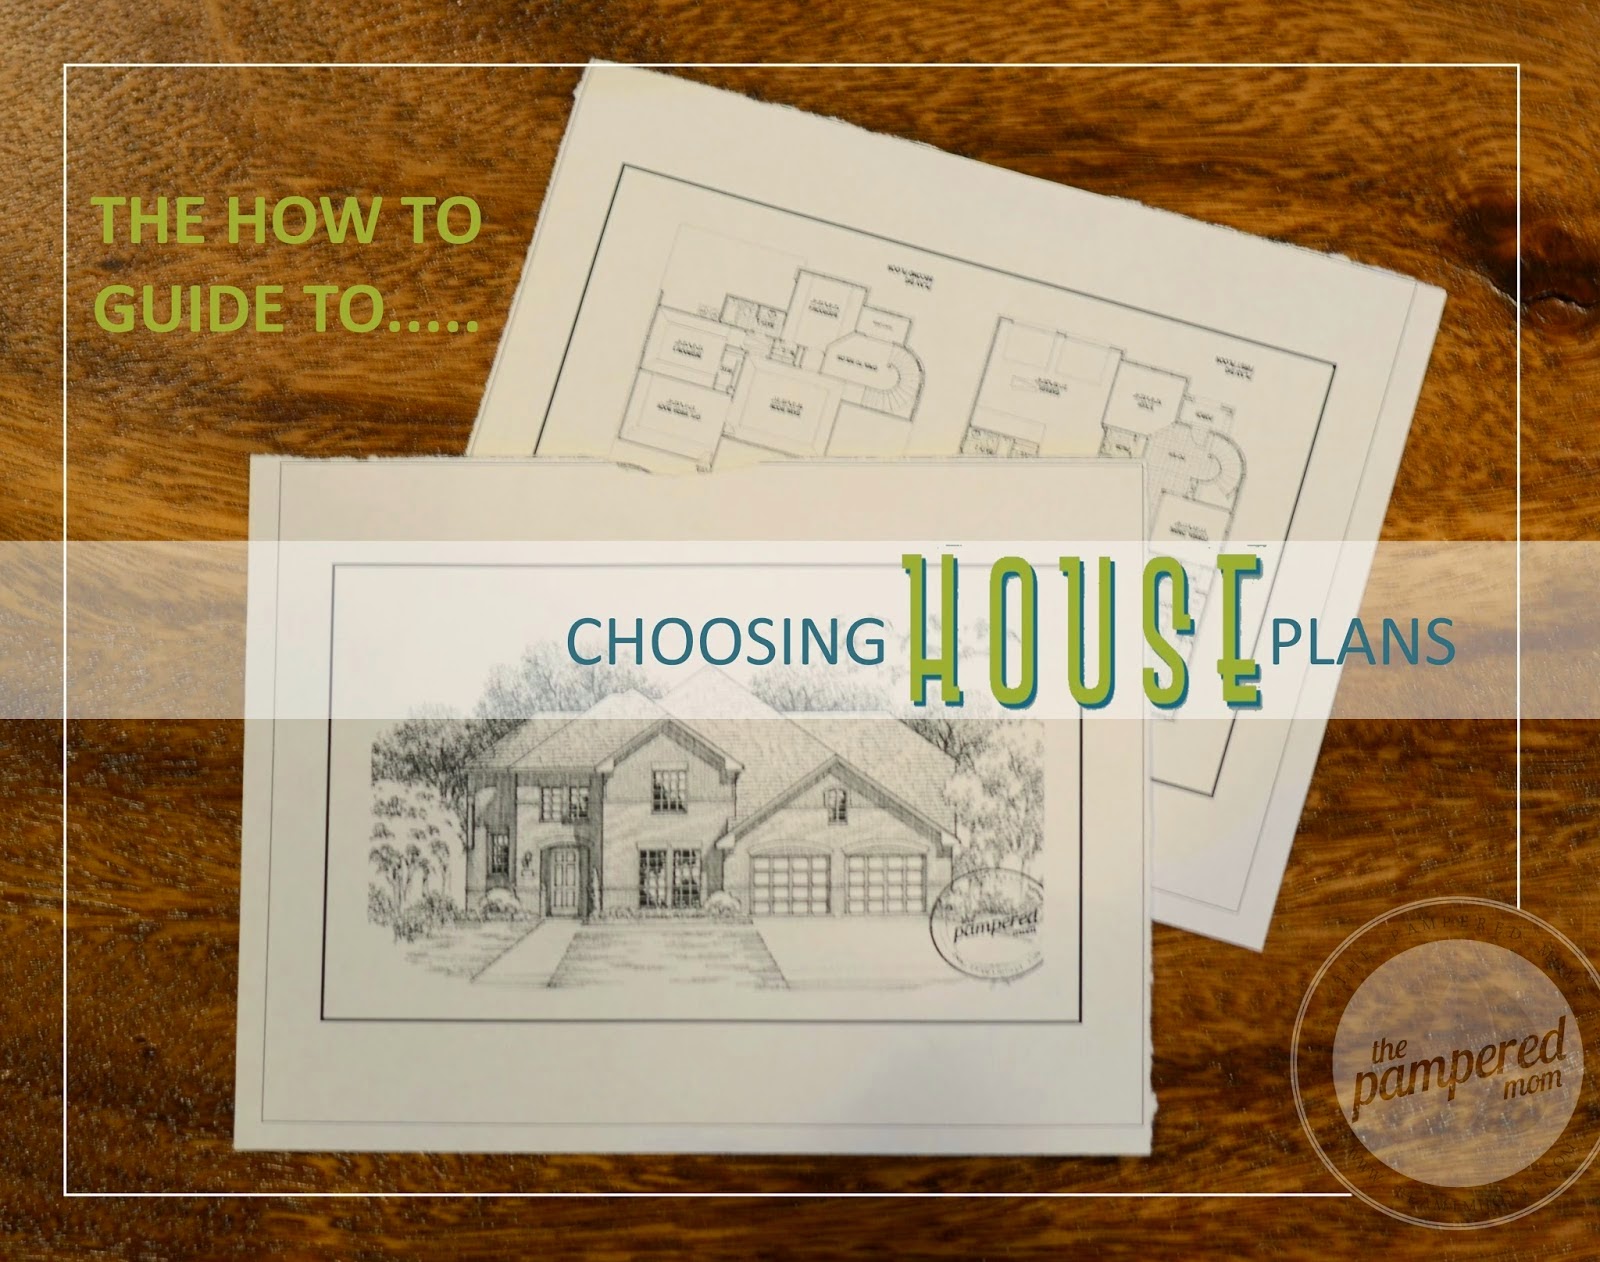 http://www.teamimhoff.com/2014/10/how-to-guide-to-choose-right-house-plan.html